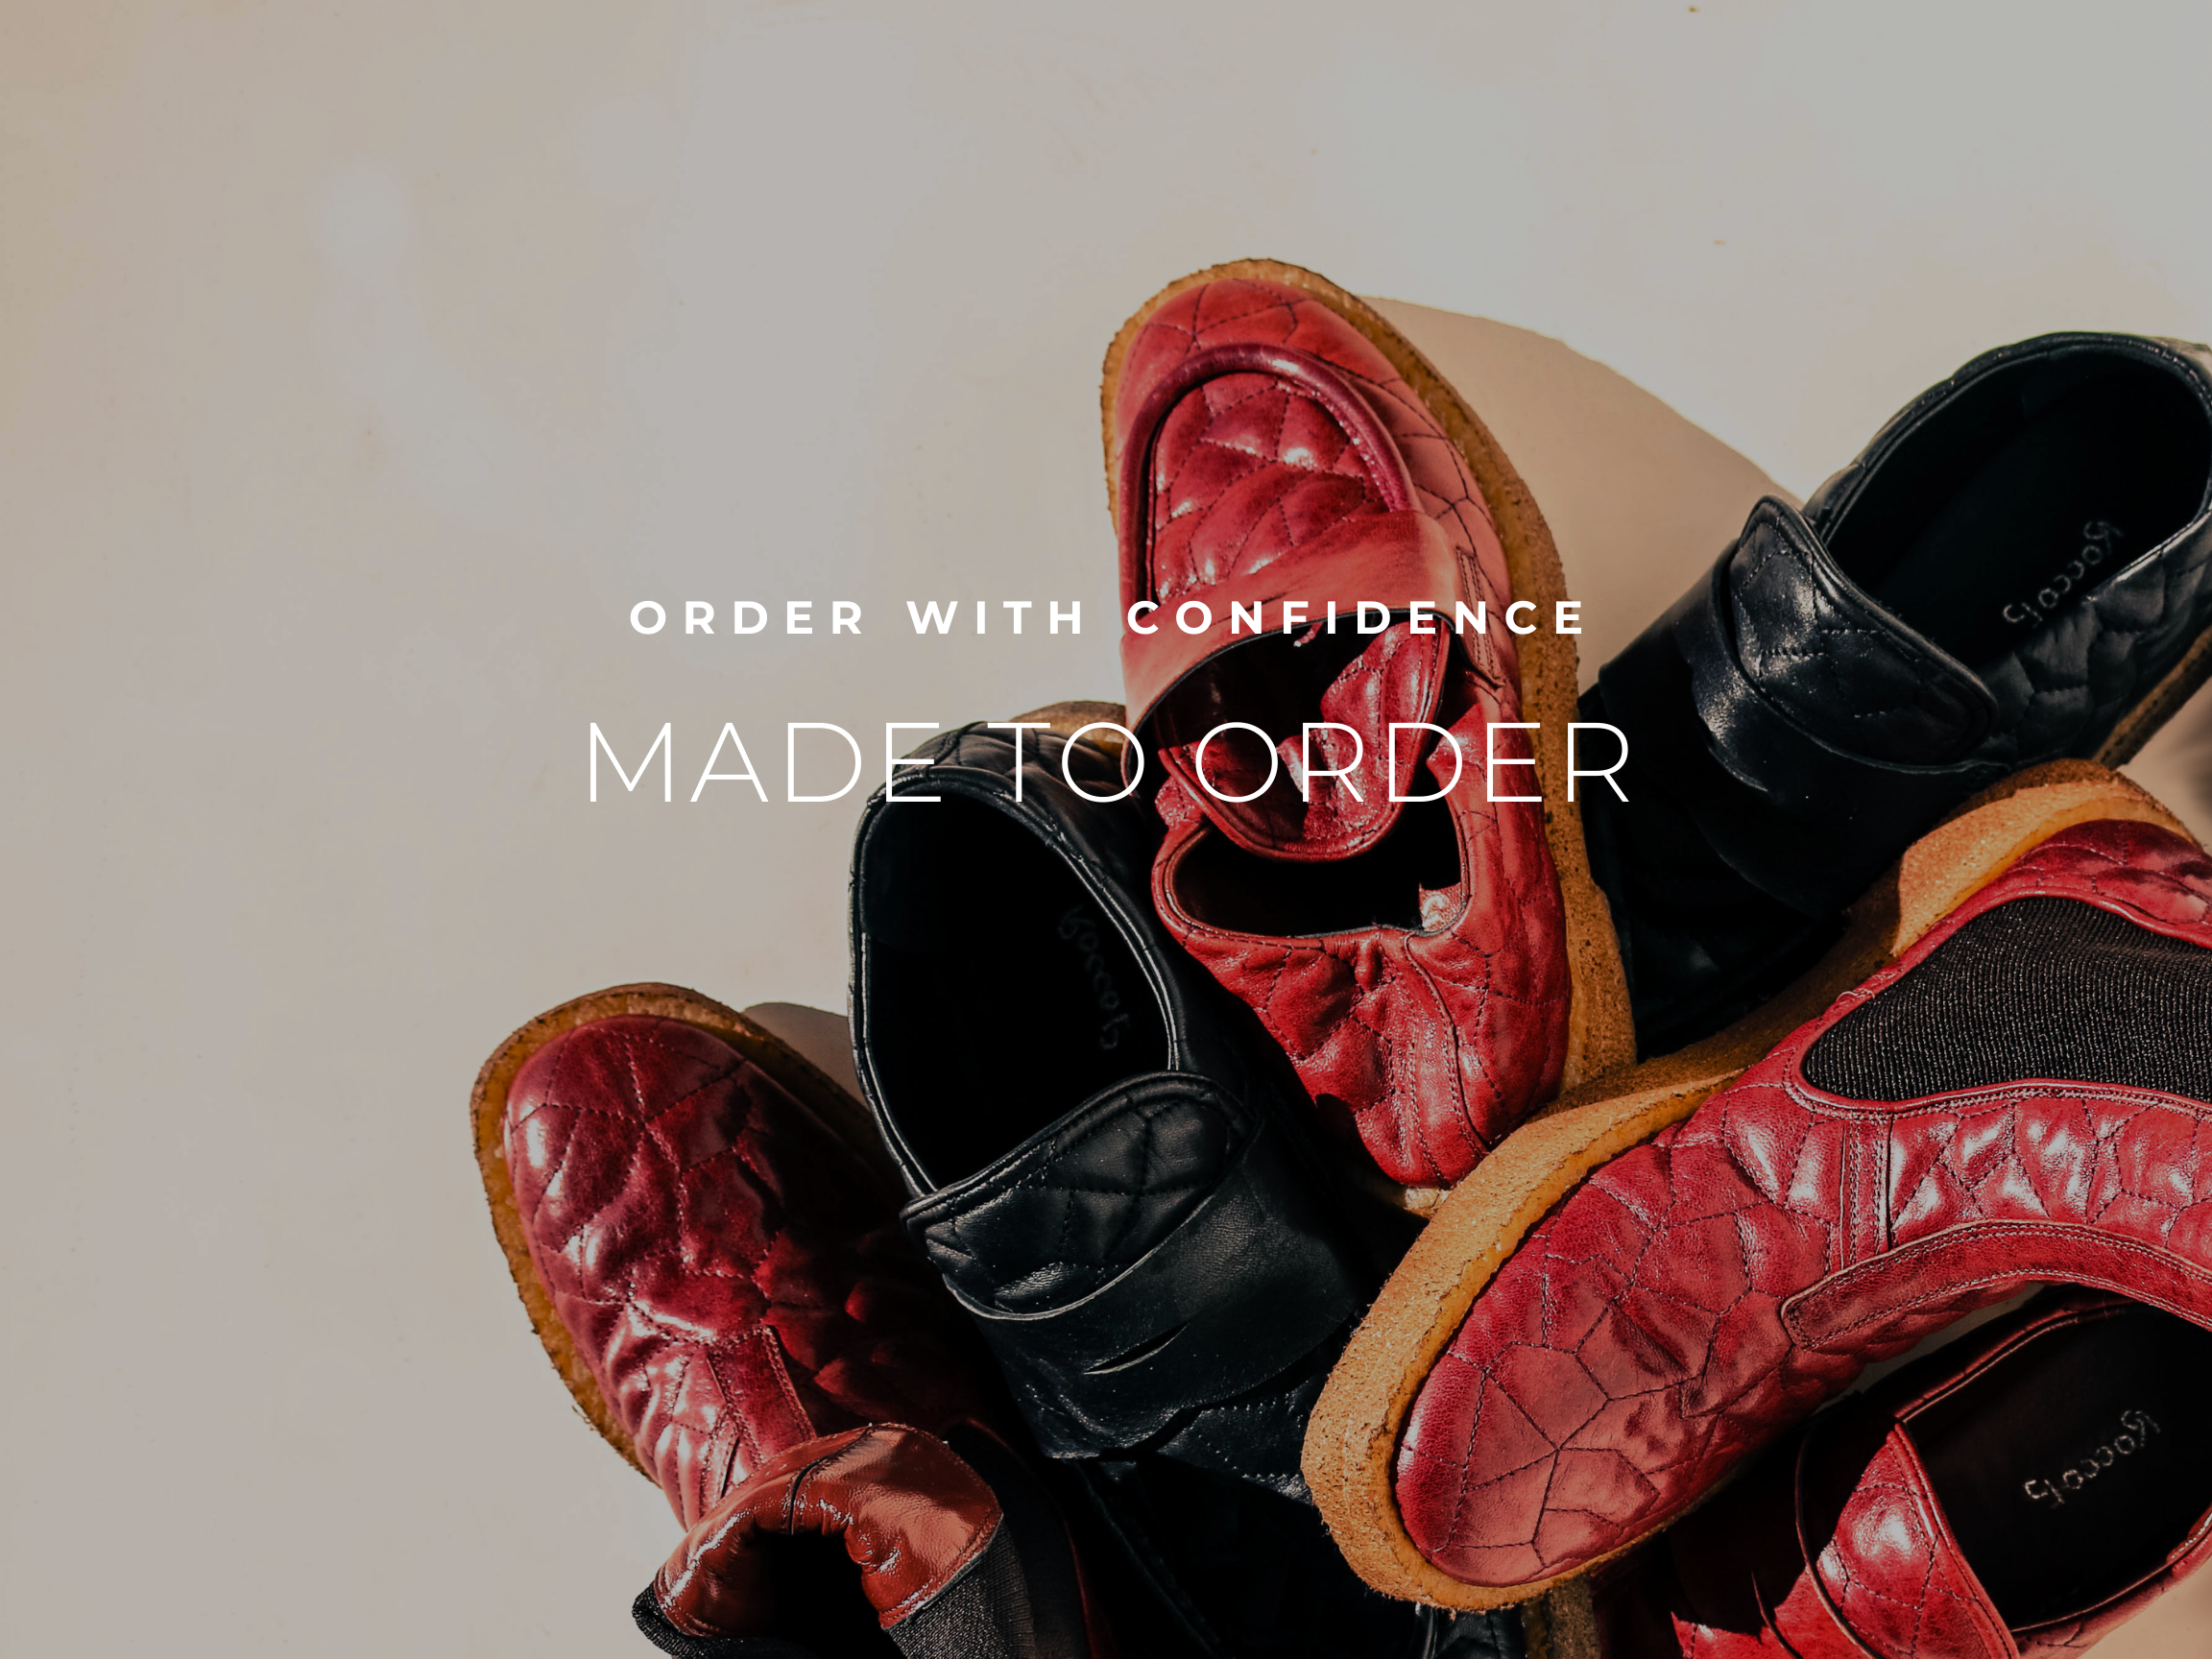 Made To Order - Order With Confidence